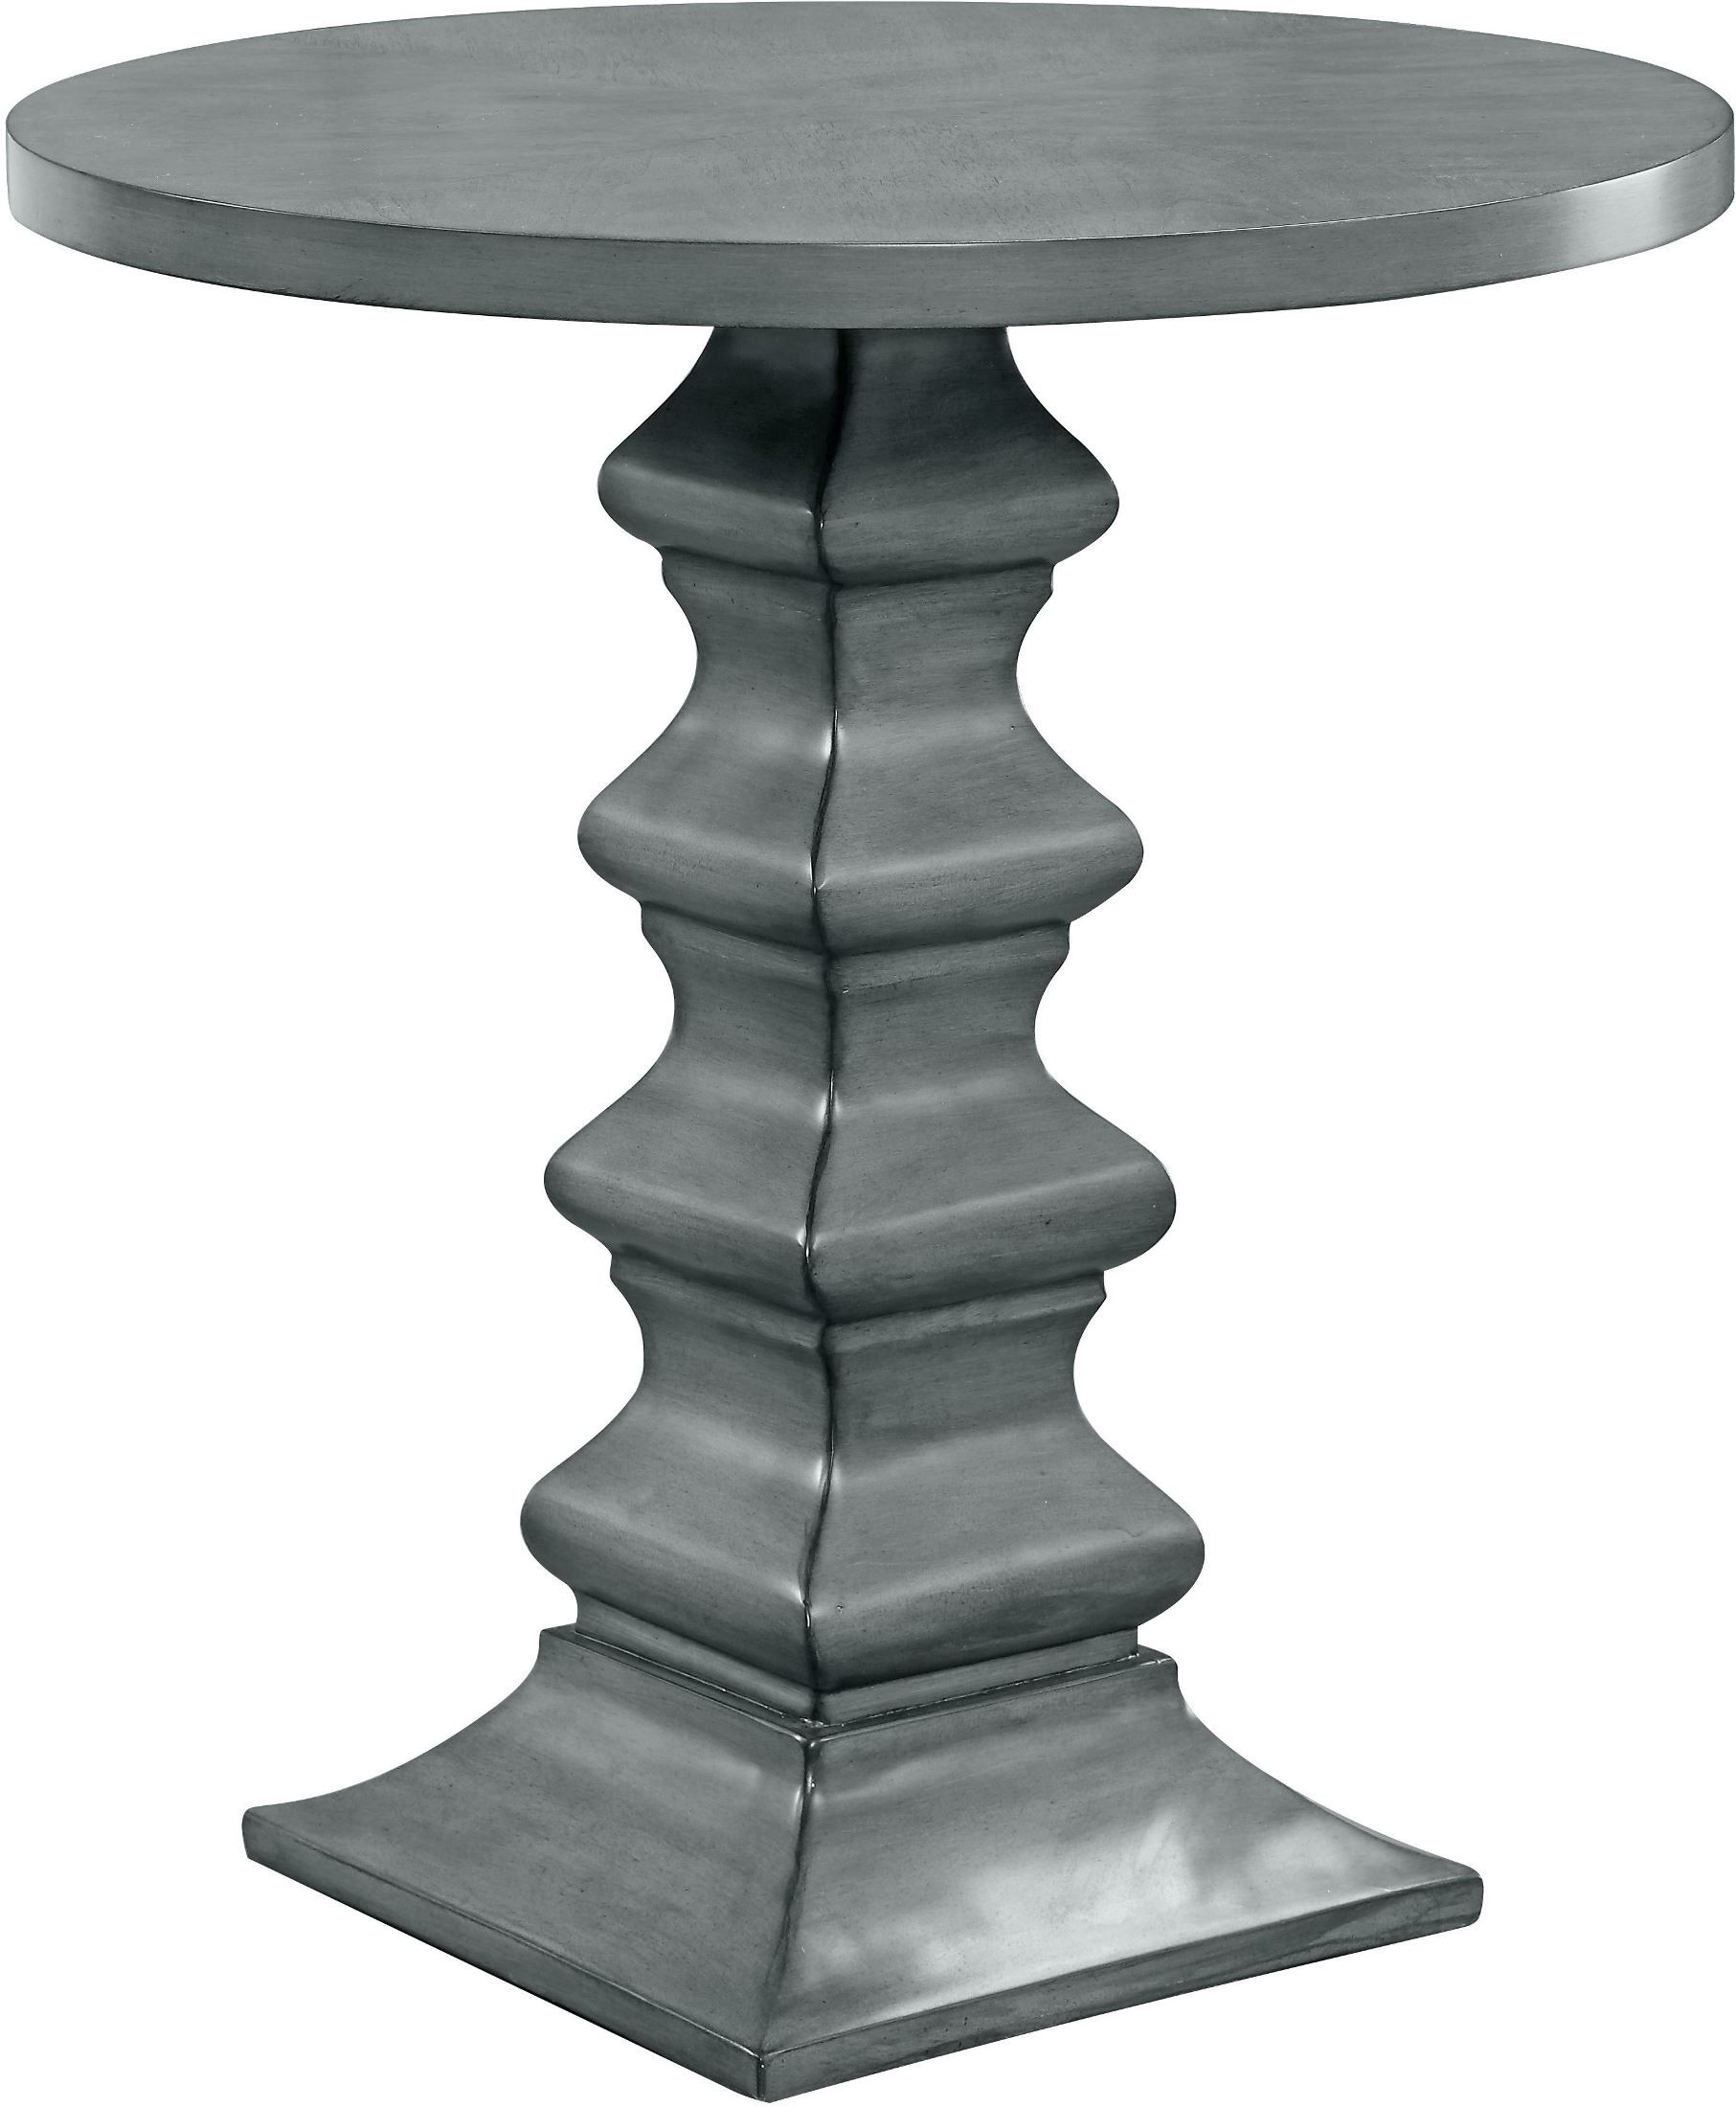 magnet burnished grey round accent table from coast gray dining pedestal base only grill chef small console chest coffee ideas west elm glass floor lamp bedroom curtains ikea